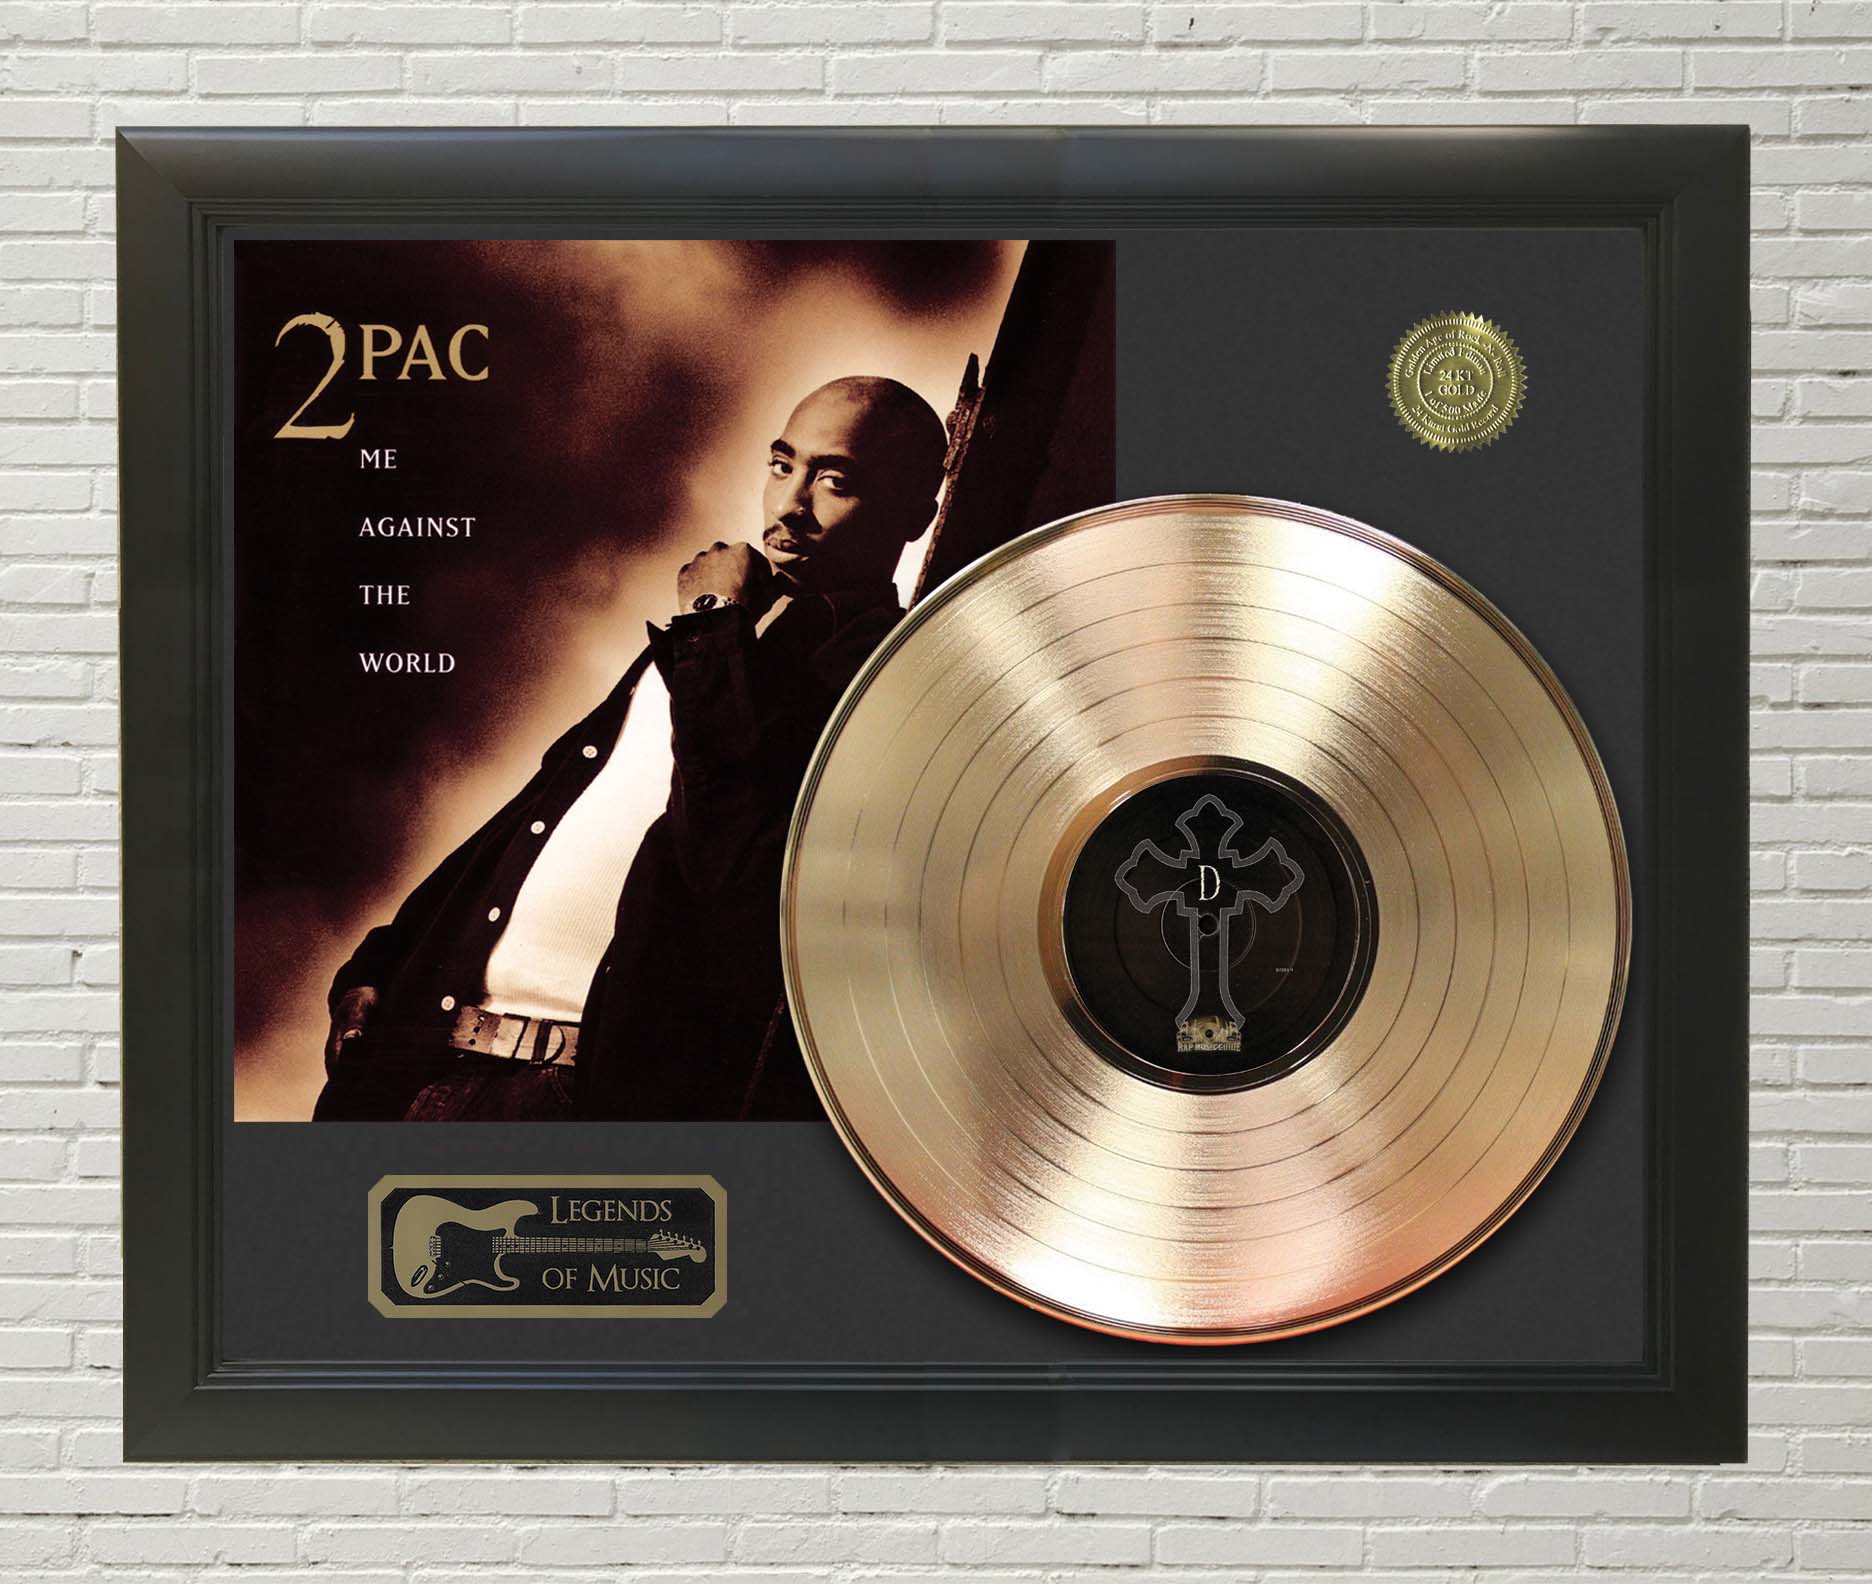 2PAC /CD DISPLAY/LIMITED EDITION/COA/ ME AGAINST THE WORLD